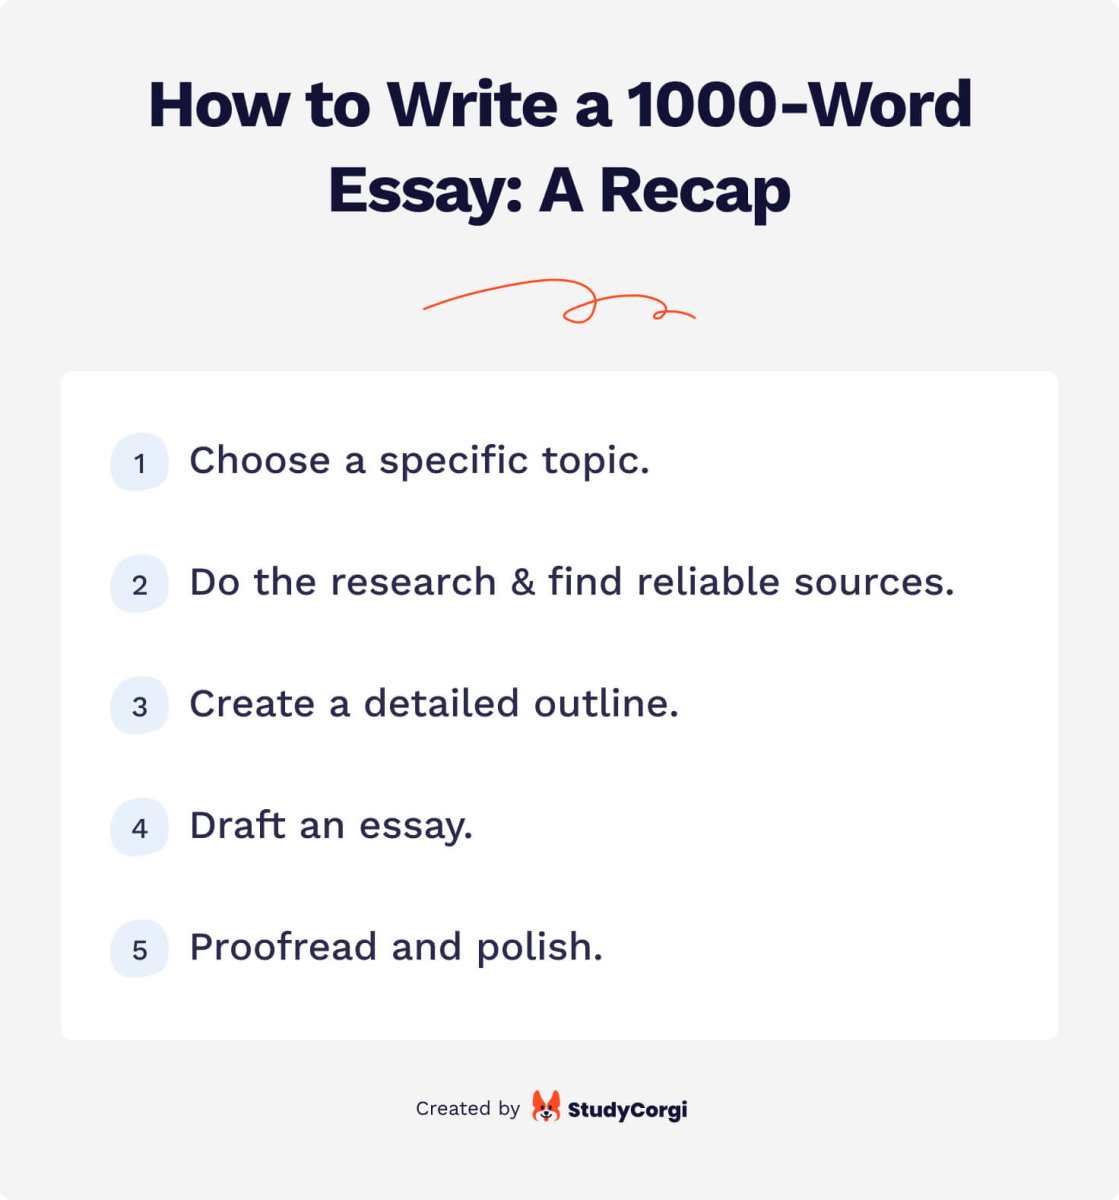 This image shows how to write a 1000-Word essay.